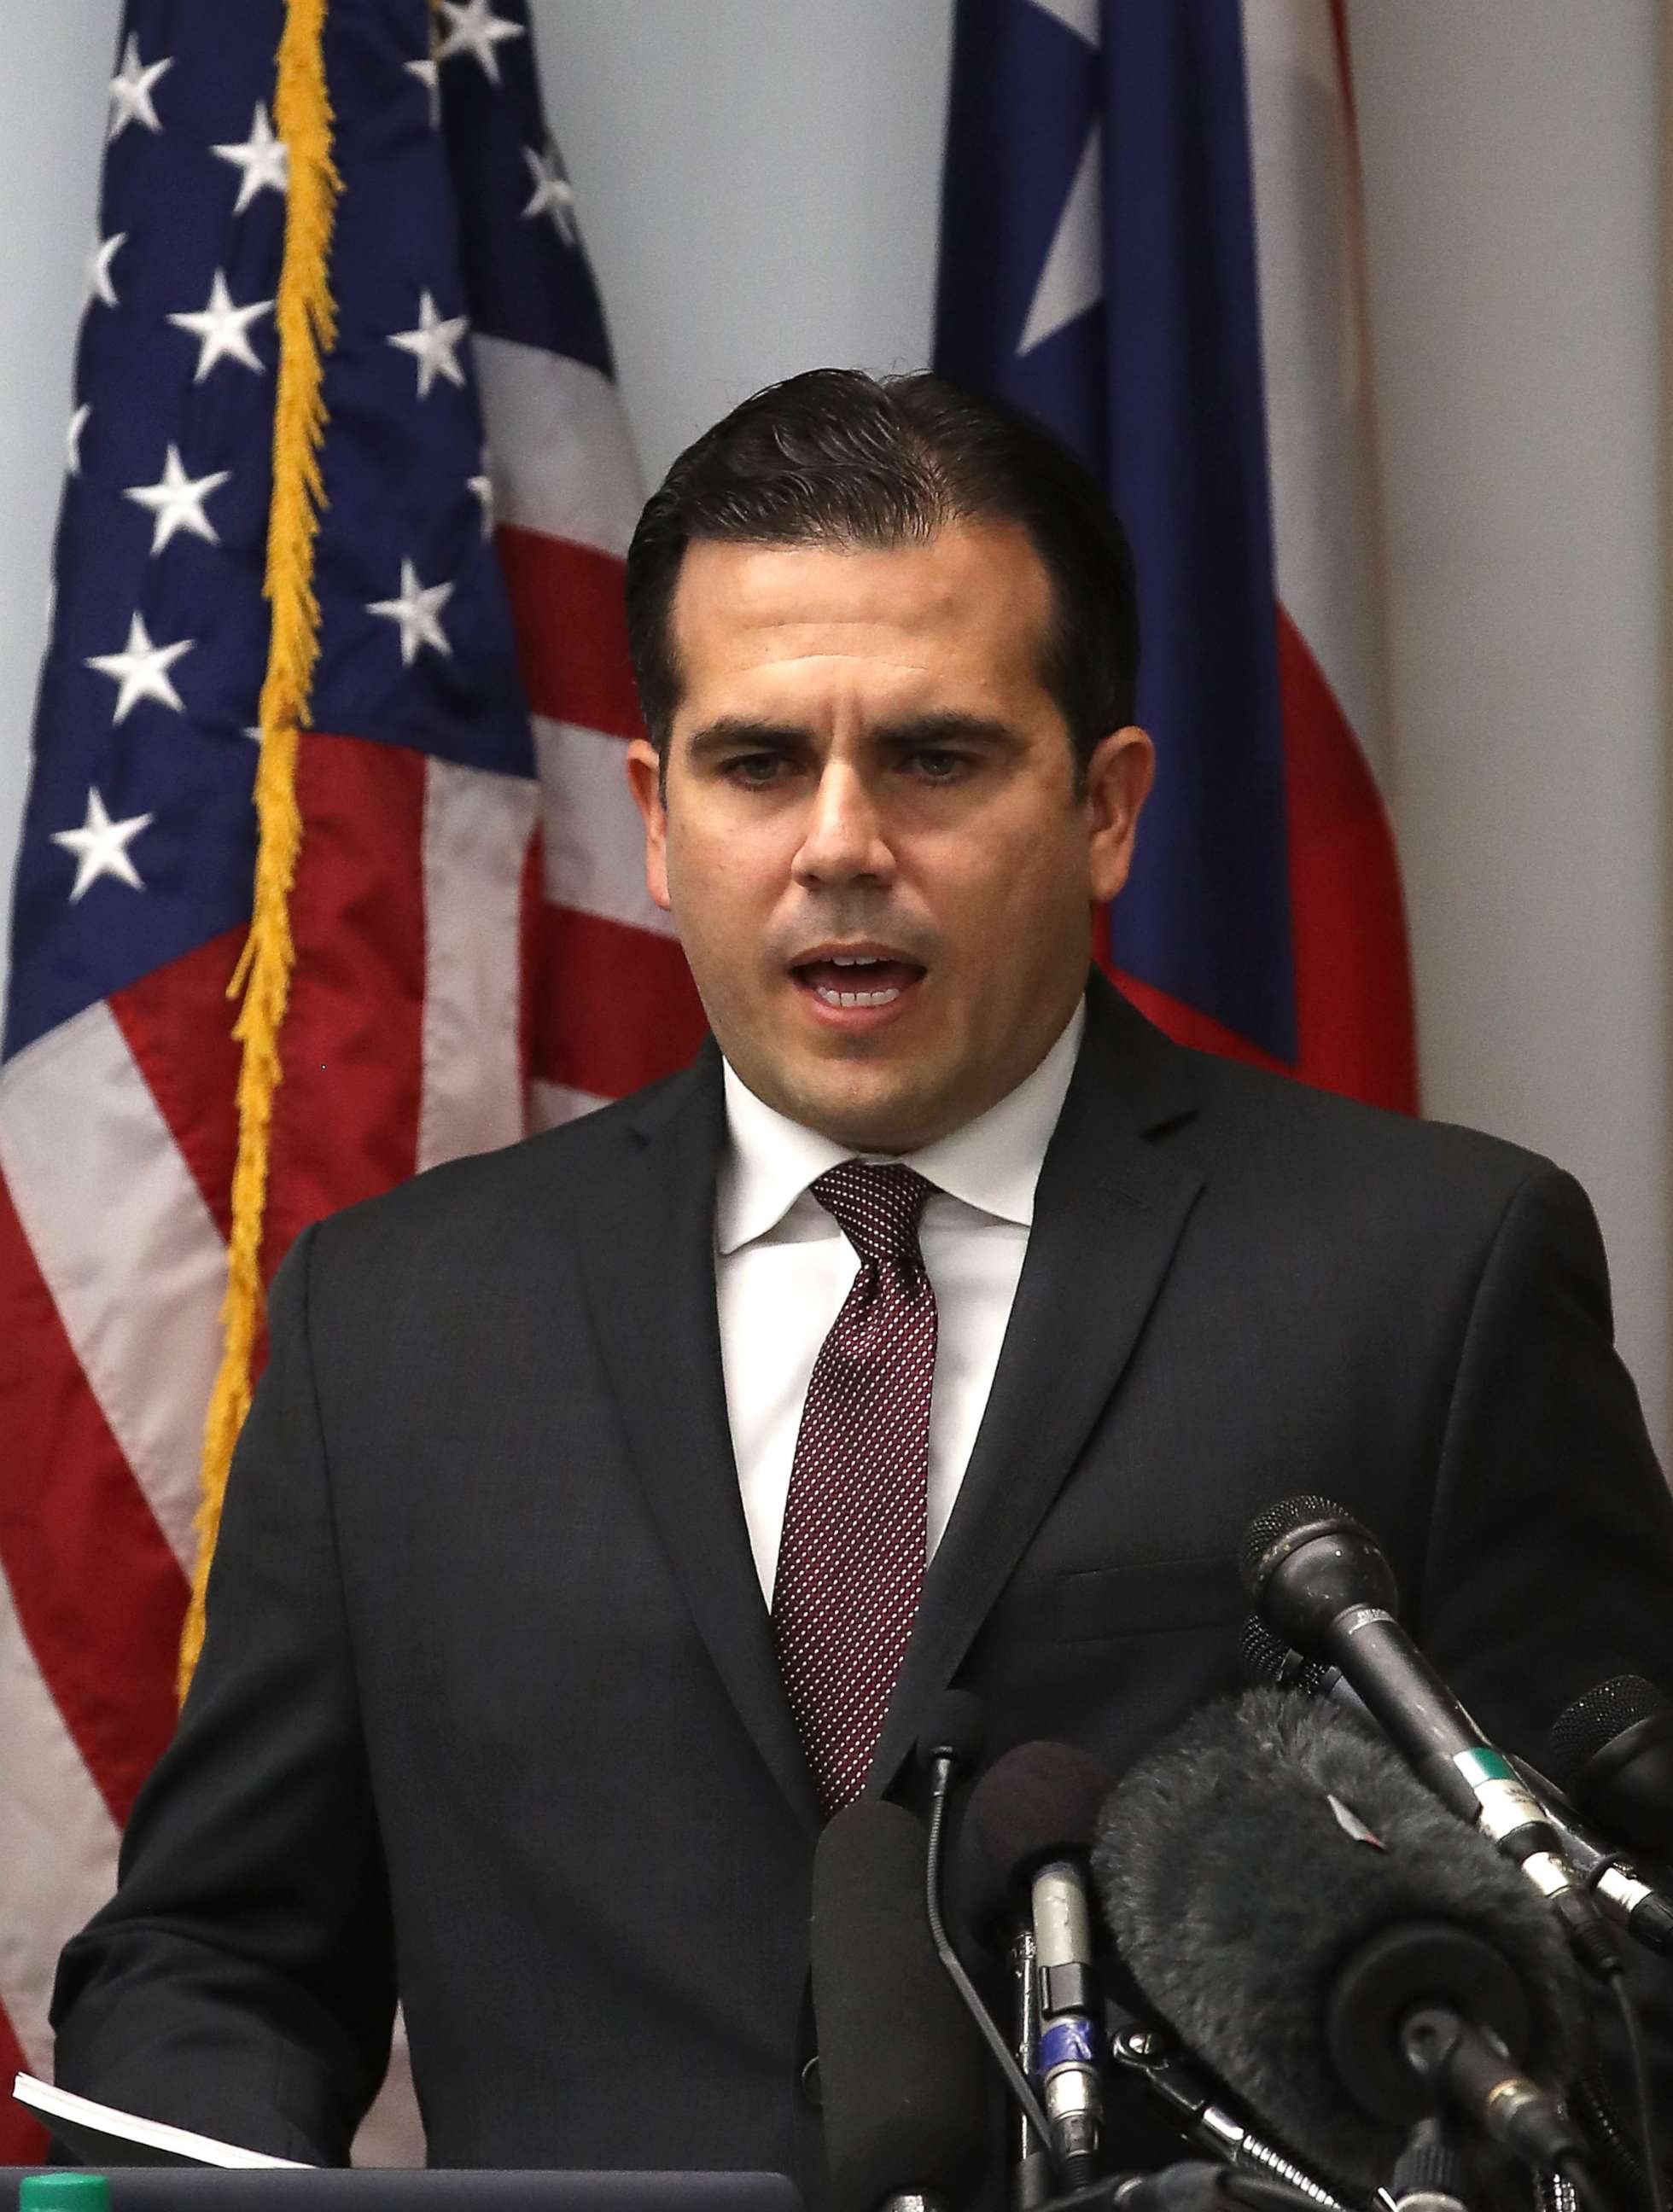 PHOTO: Puerto Rico Governor Ricardo Rossello speaks during a news conference to discuss the historic effects of Hurricane Maria, Nov. 13, 2017 in Washington, D.C.